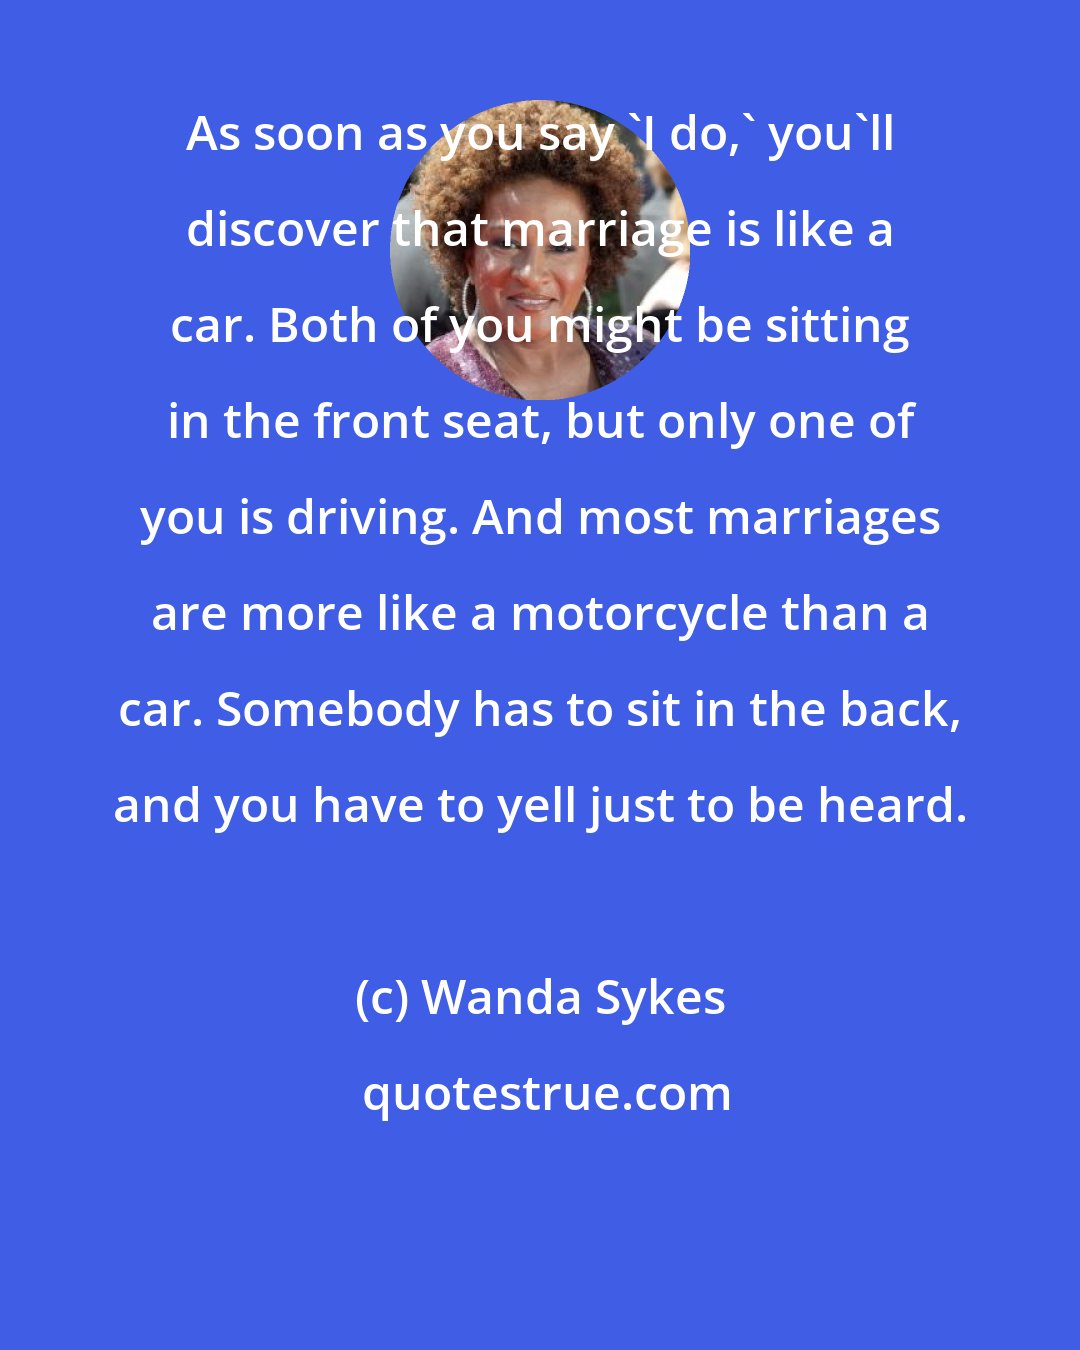 Wanda Sykes: As soon as you say 'I do,' you'll discover that marriage is like a car. Both of you might be sitting in the front seat, but only one of you is driving. And most marriages are more like a motorcycle than a car. Somebody has to sit in the back, and you have to yell just to be heard.